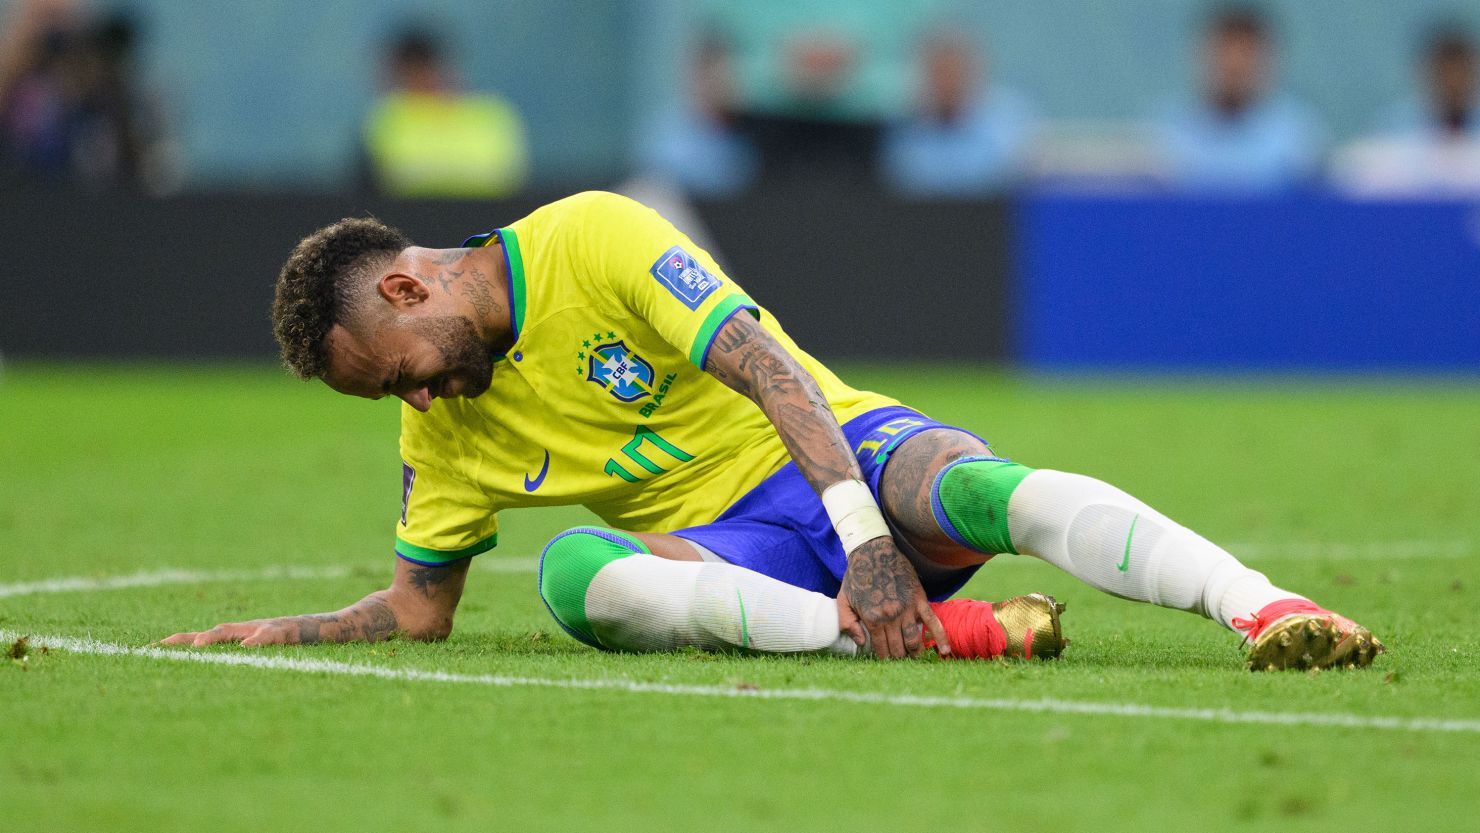 Plan revealed to change three stars on Brazil's World Cup shirt to